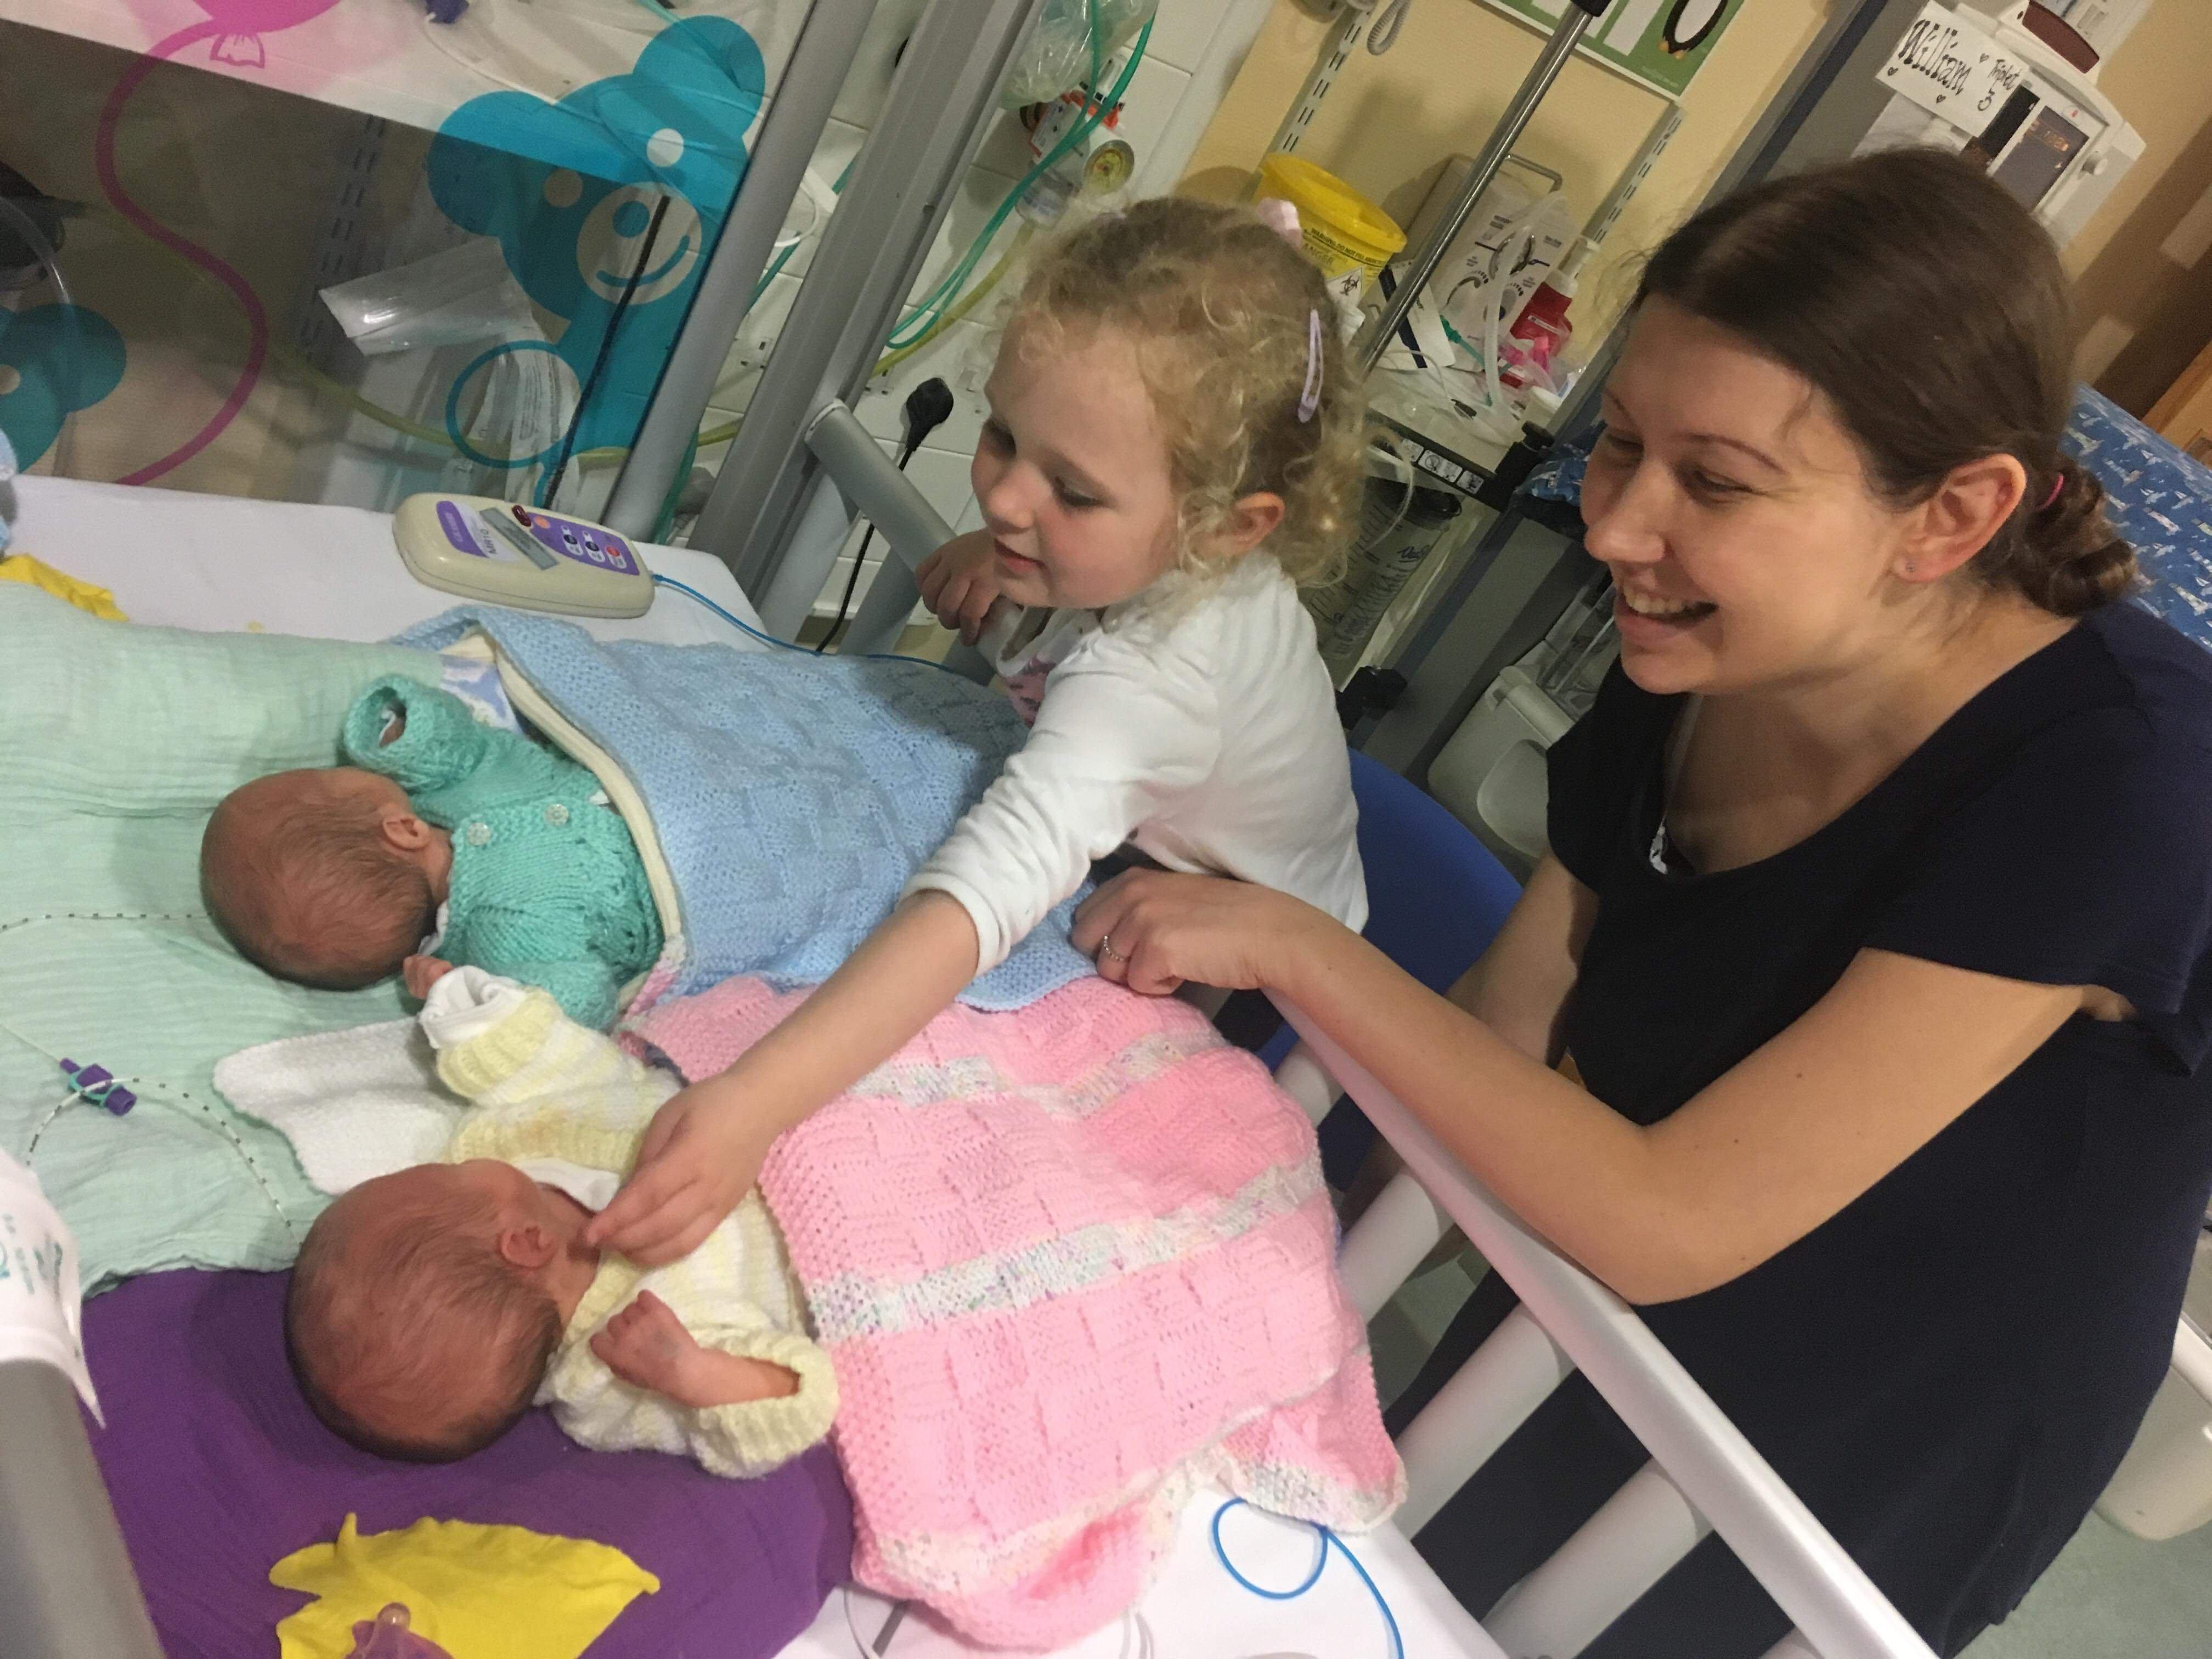 Cheryl Carter and Chris Pegrum from Yapton have triplets. Cheryl Carter, 34, from Blenheim Road, Yapton, with her daughter Betty and her newborn triplets